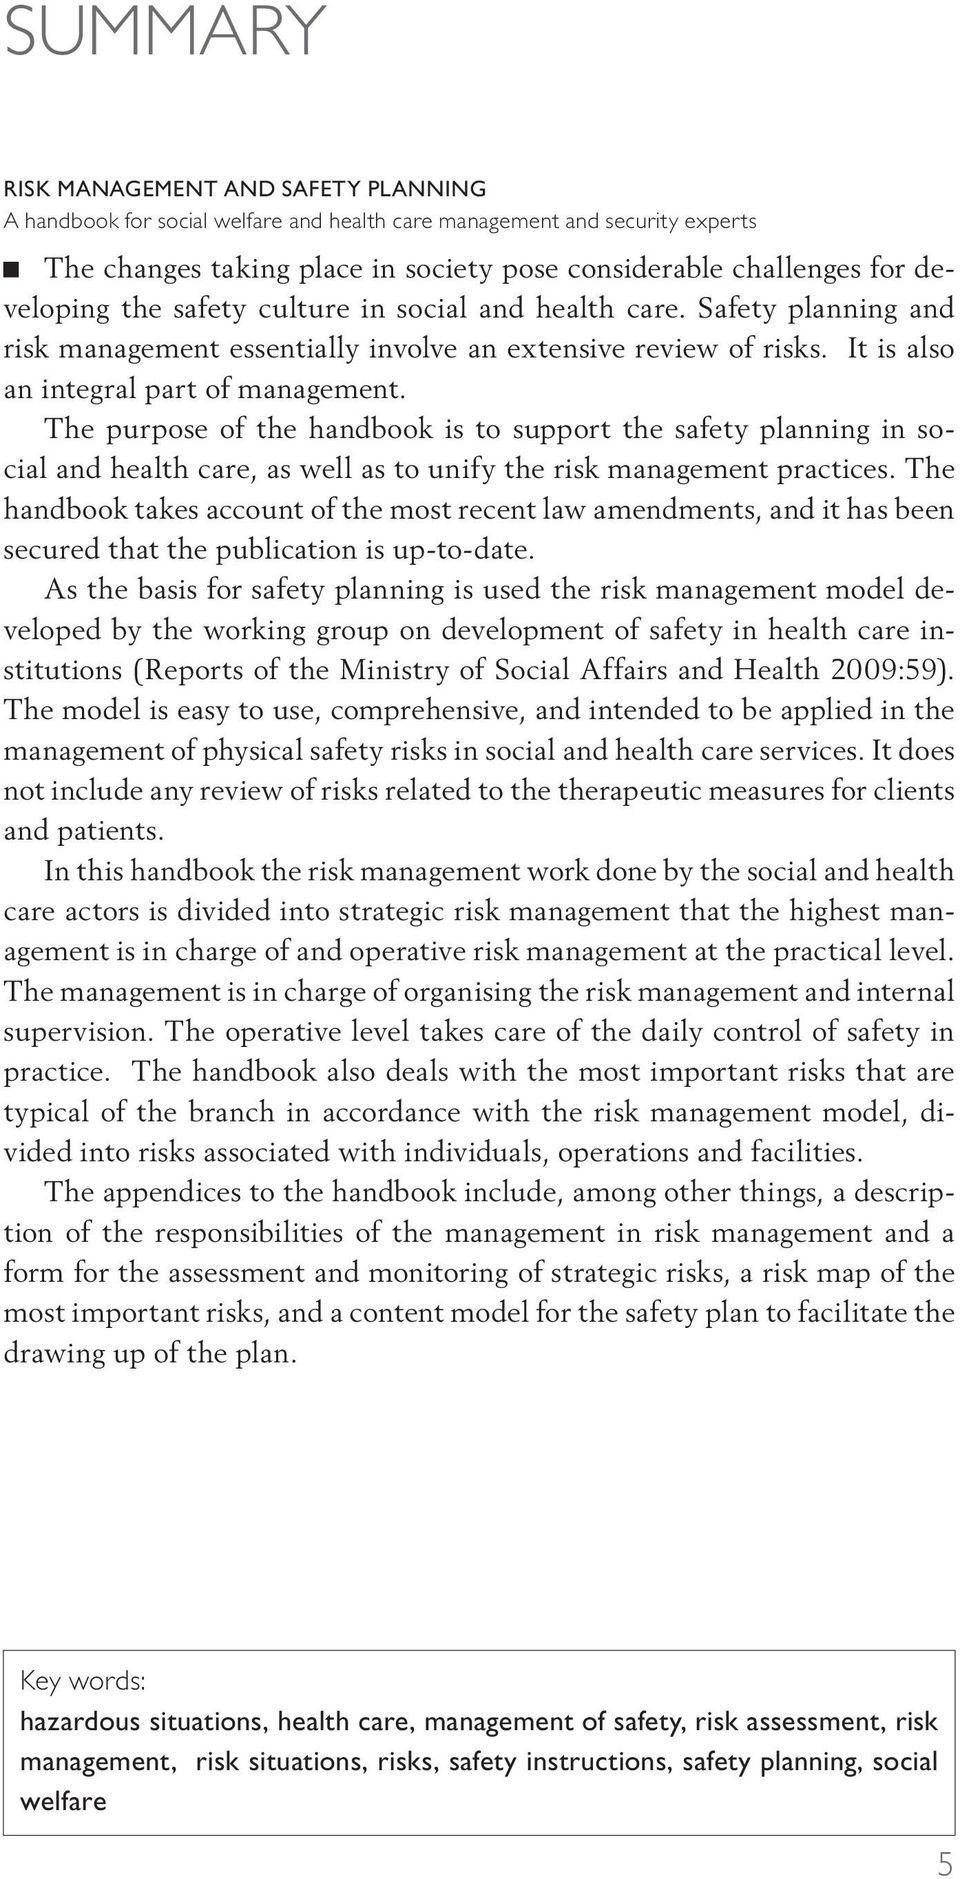 The purpose of the handbook is to support the safety planning in social and health care, as well as to unify the risk management practices.